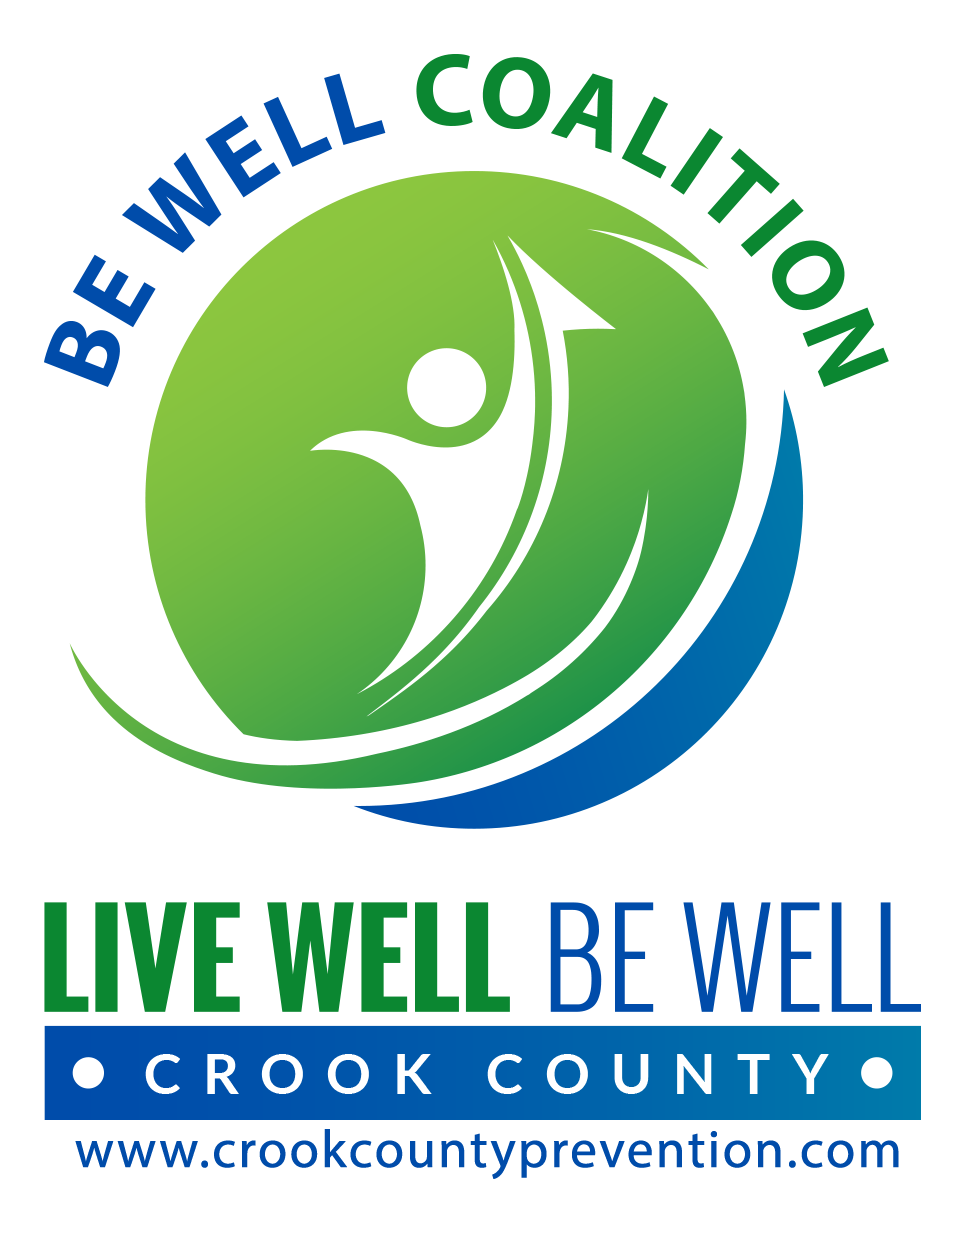 Be Well Coalition